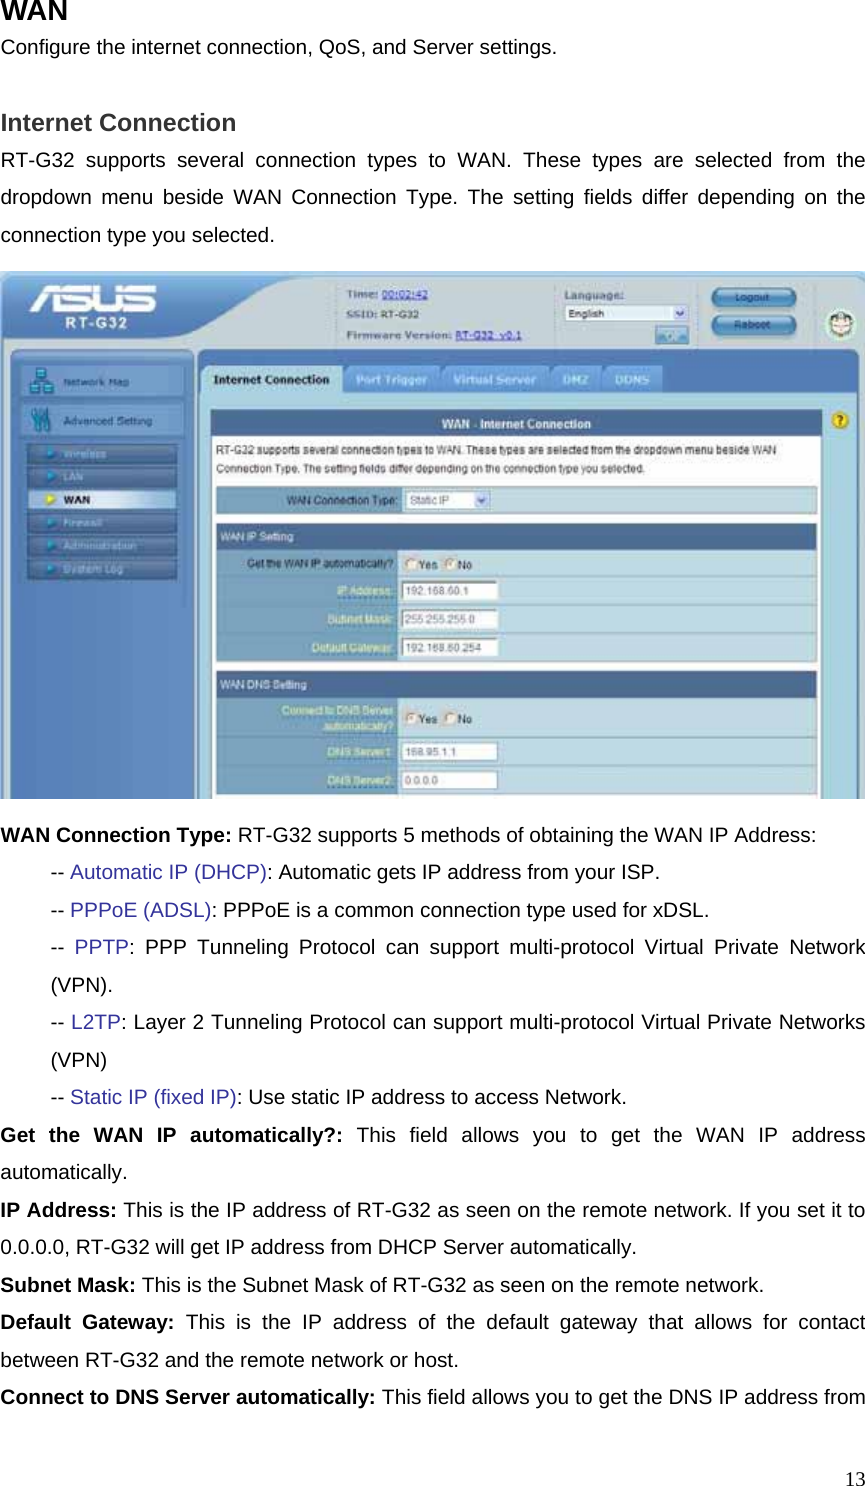  13WAN Configure the internet connection, QoS, and Server settings.  Internet Connection RT-G32 supports several connection types to WAN. These types are selected from the dropdown menu beside WAN Connection Type. The setting fields differ depending on the connection type you selected.  WAN Connection Type: RT-G32 supports 5 methods of obtaining the WAN IP Address:  -- Automatic IP (DHCP): Automatic gets IP address from your ISP.  -- PPPoE (ADSL): PPPoE is a common connection type used for xDSL.  -- PPTP: PPP Tunneling Protocol can support multi-protocol Virtual Private Network  (VPN).  -- L2TP: Layer 2 Tunneling Protocol can support multi-protocol Virtual Private Networks  (VPN)  -- Static IP (fixed IP): Use static IP address to access Network.   Get the WAN IP automatically?: This field allows you to get the WAN IP address automatically. IP Address: This is the IP address of RT-G32 as seen on the remote network. If you set it to 0.0.0.0, RT-G32 will get IP address from DHCP Server automatically. Subnet Mask: This is the Subnet Mask of RT-G32 as seen on the remote network. Default Gateway: This is the IP address of the default gateway that allows for contact between RT-G32 and the remote network or host. Connect to DNS Server automatically: This field allows you to get the DNS IP address from 